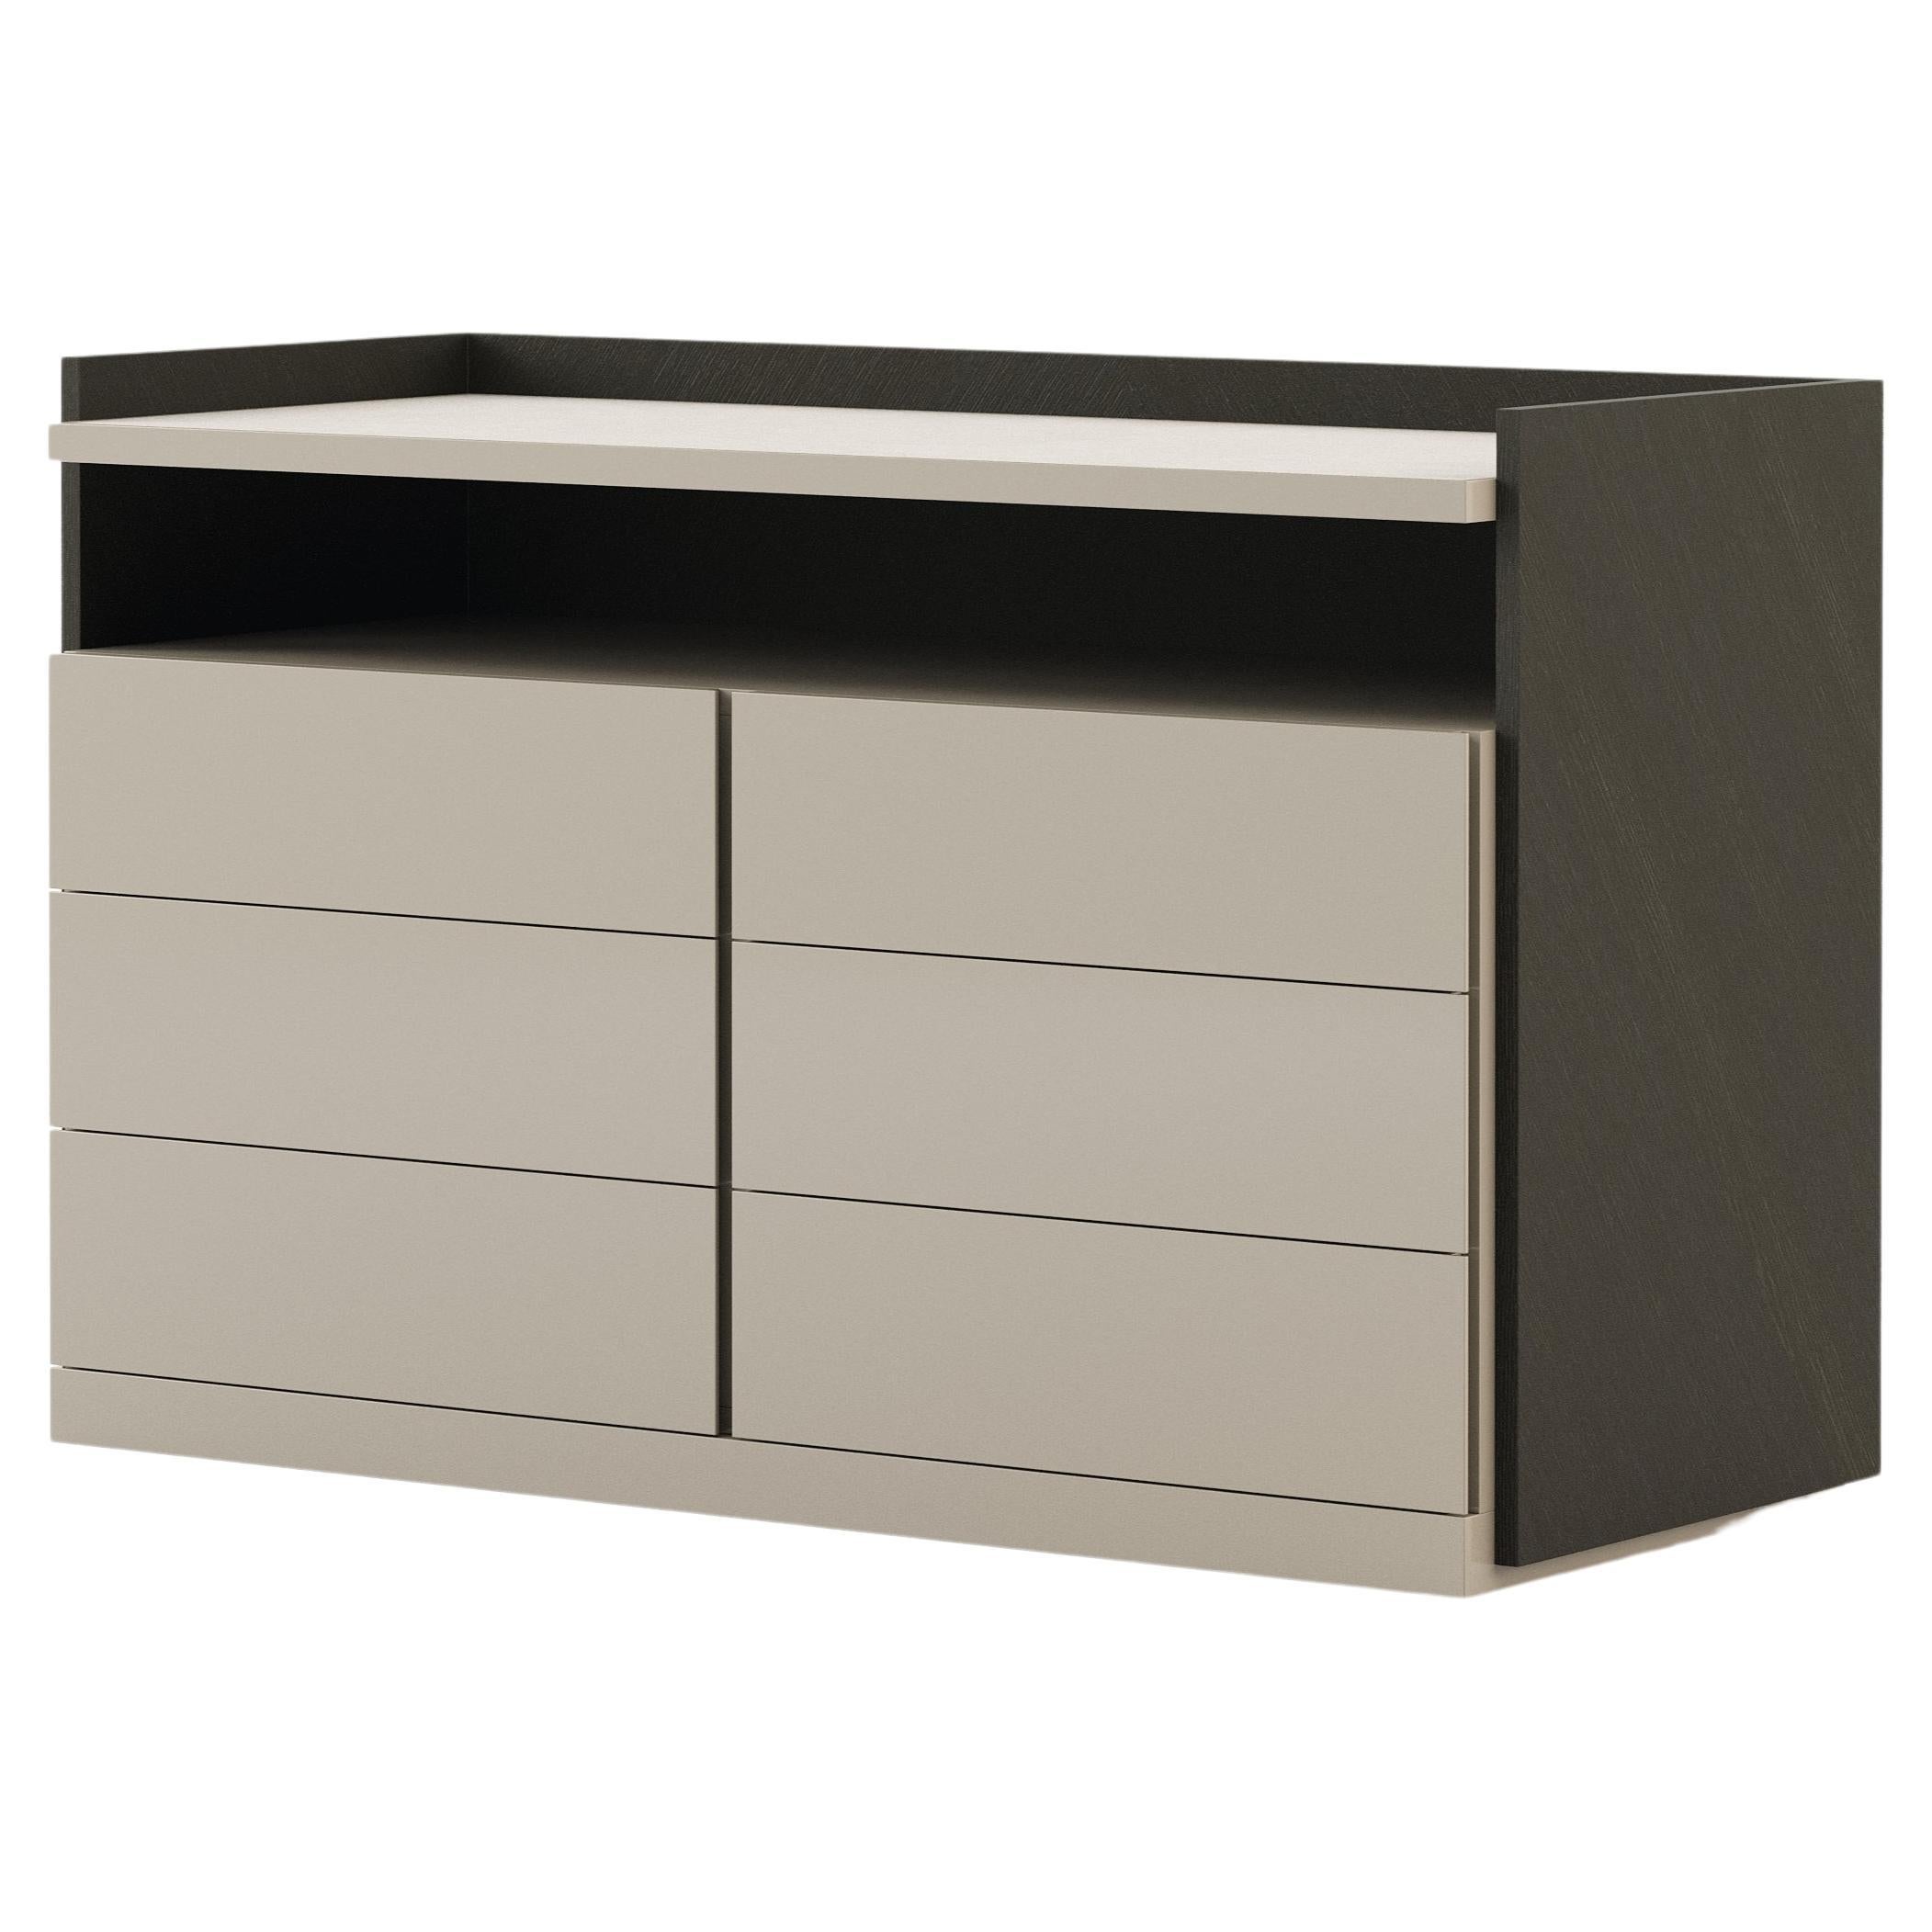 Modern Milos Chest of Drawers Made With Oak, Beige Lacquer and Suede details  For Sale